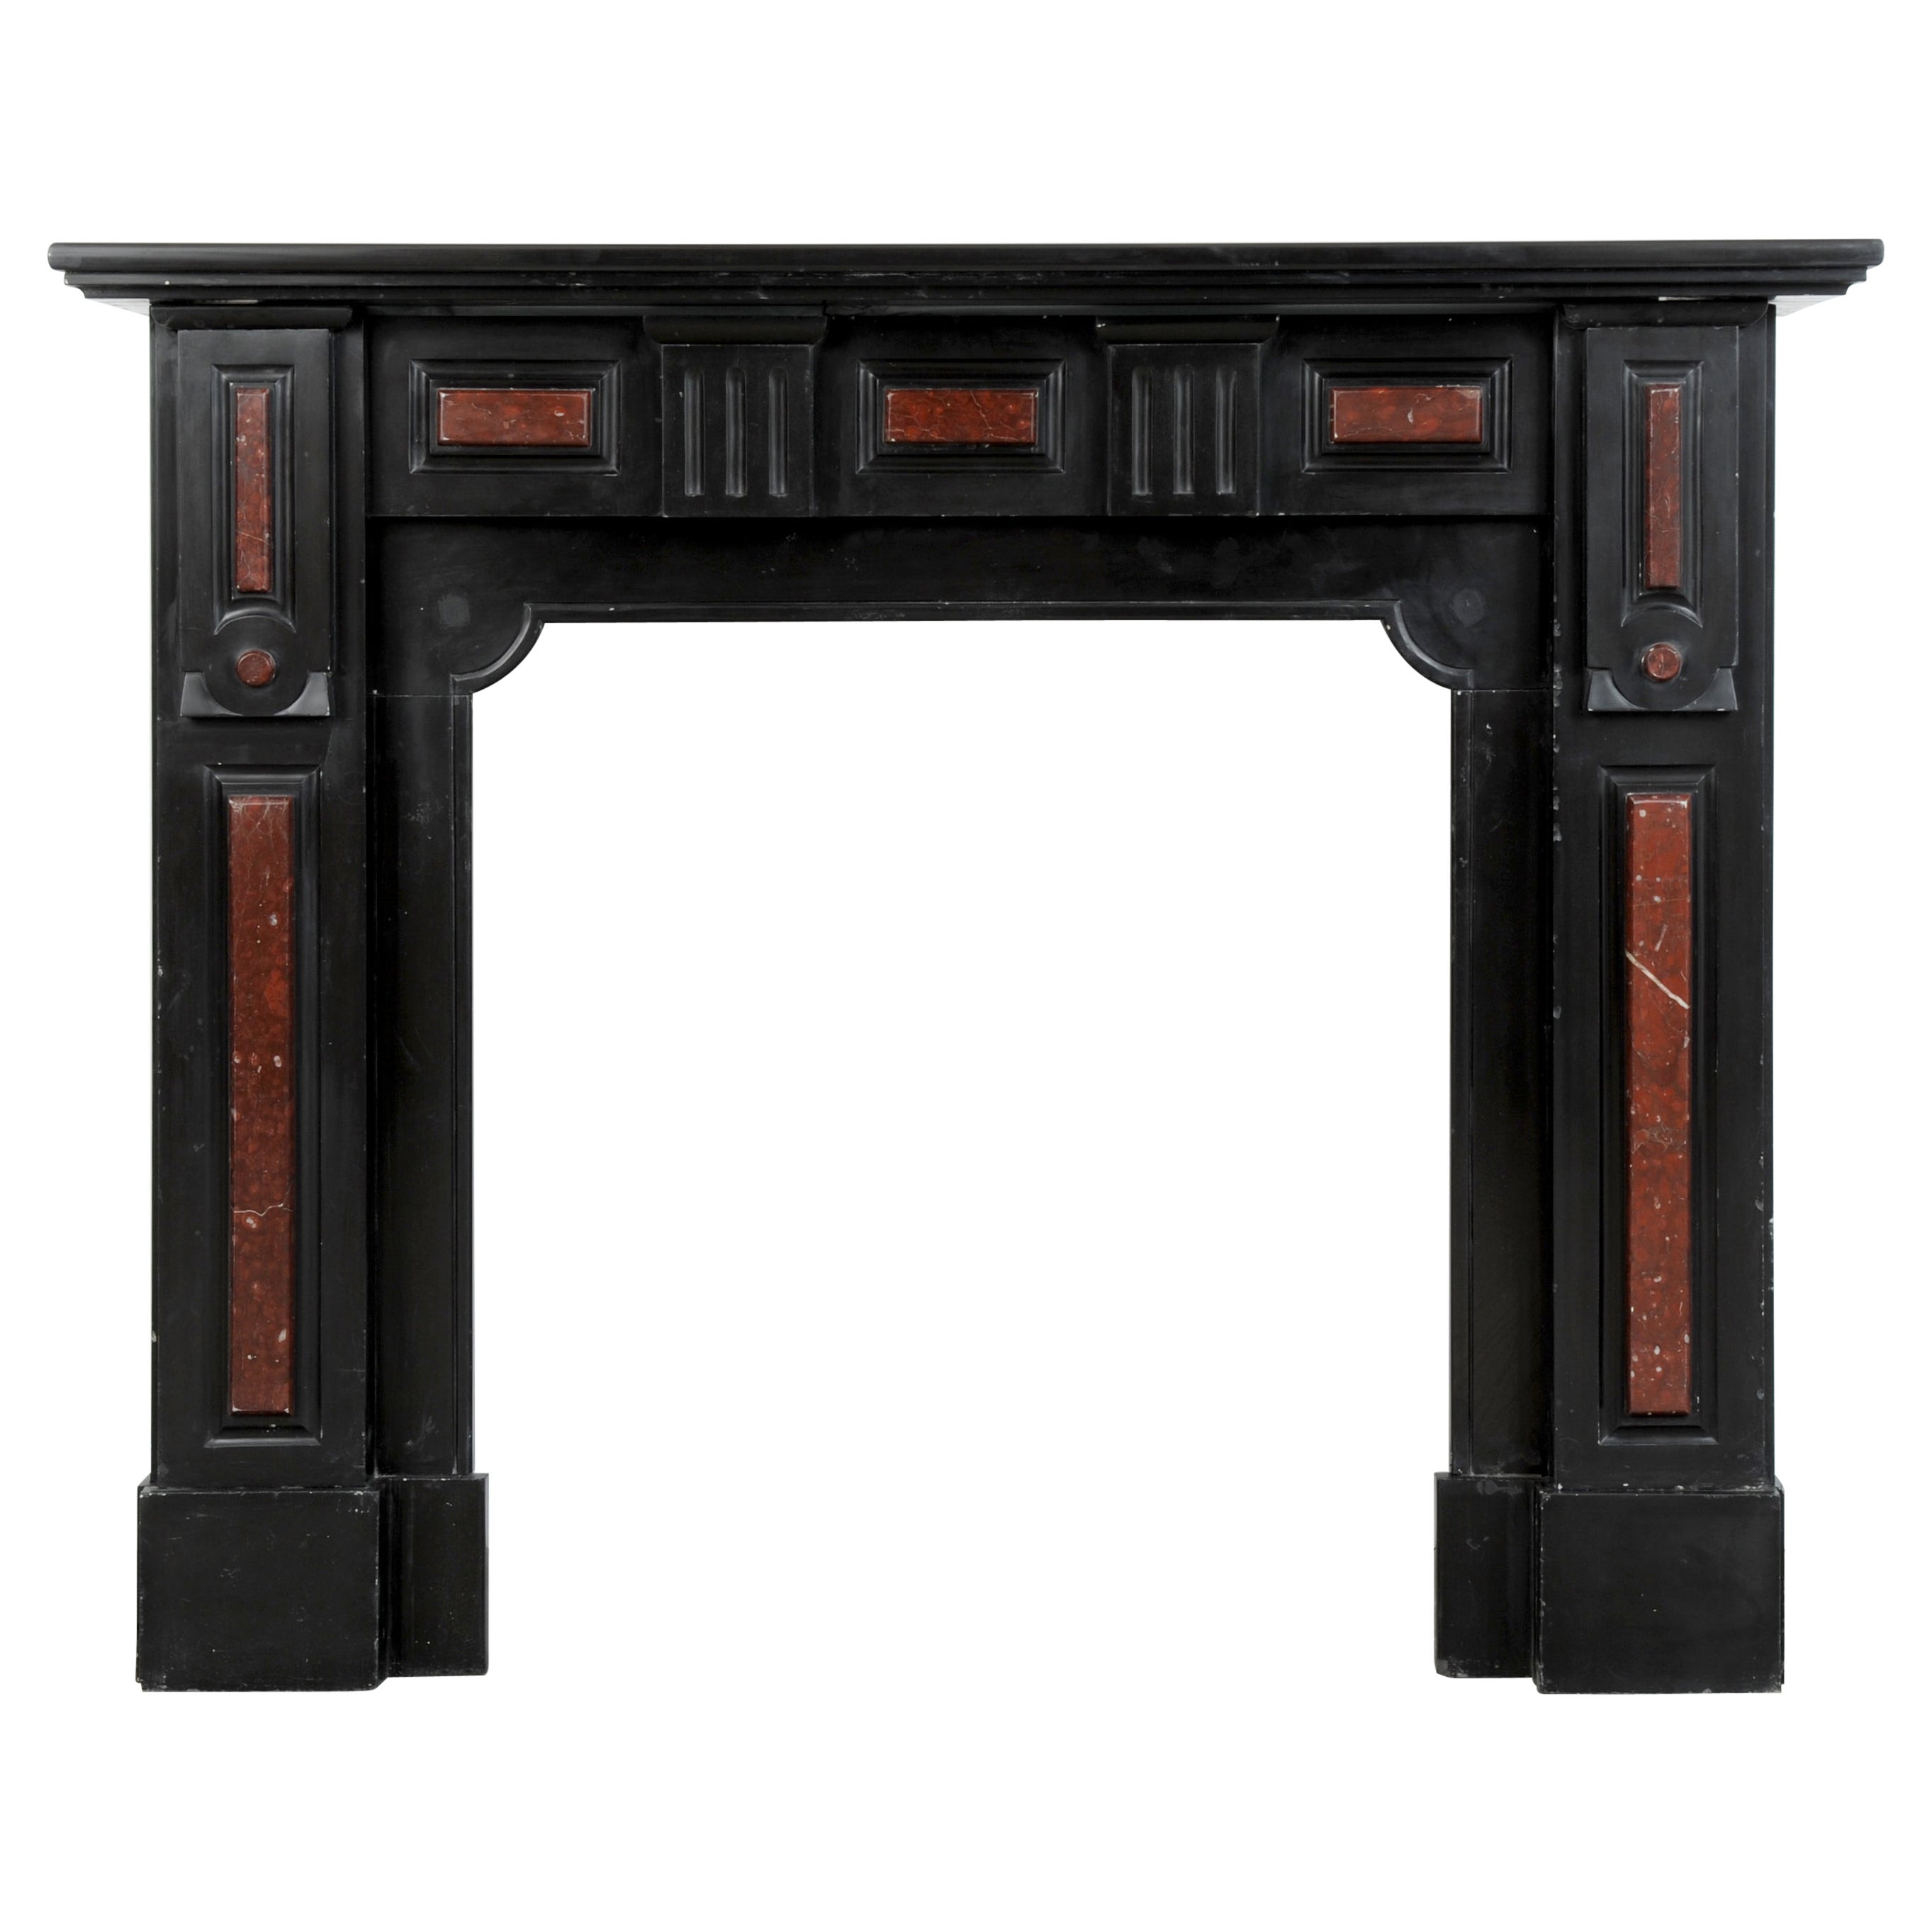 Antique Black and Red Marble Fireplace For Sale